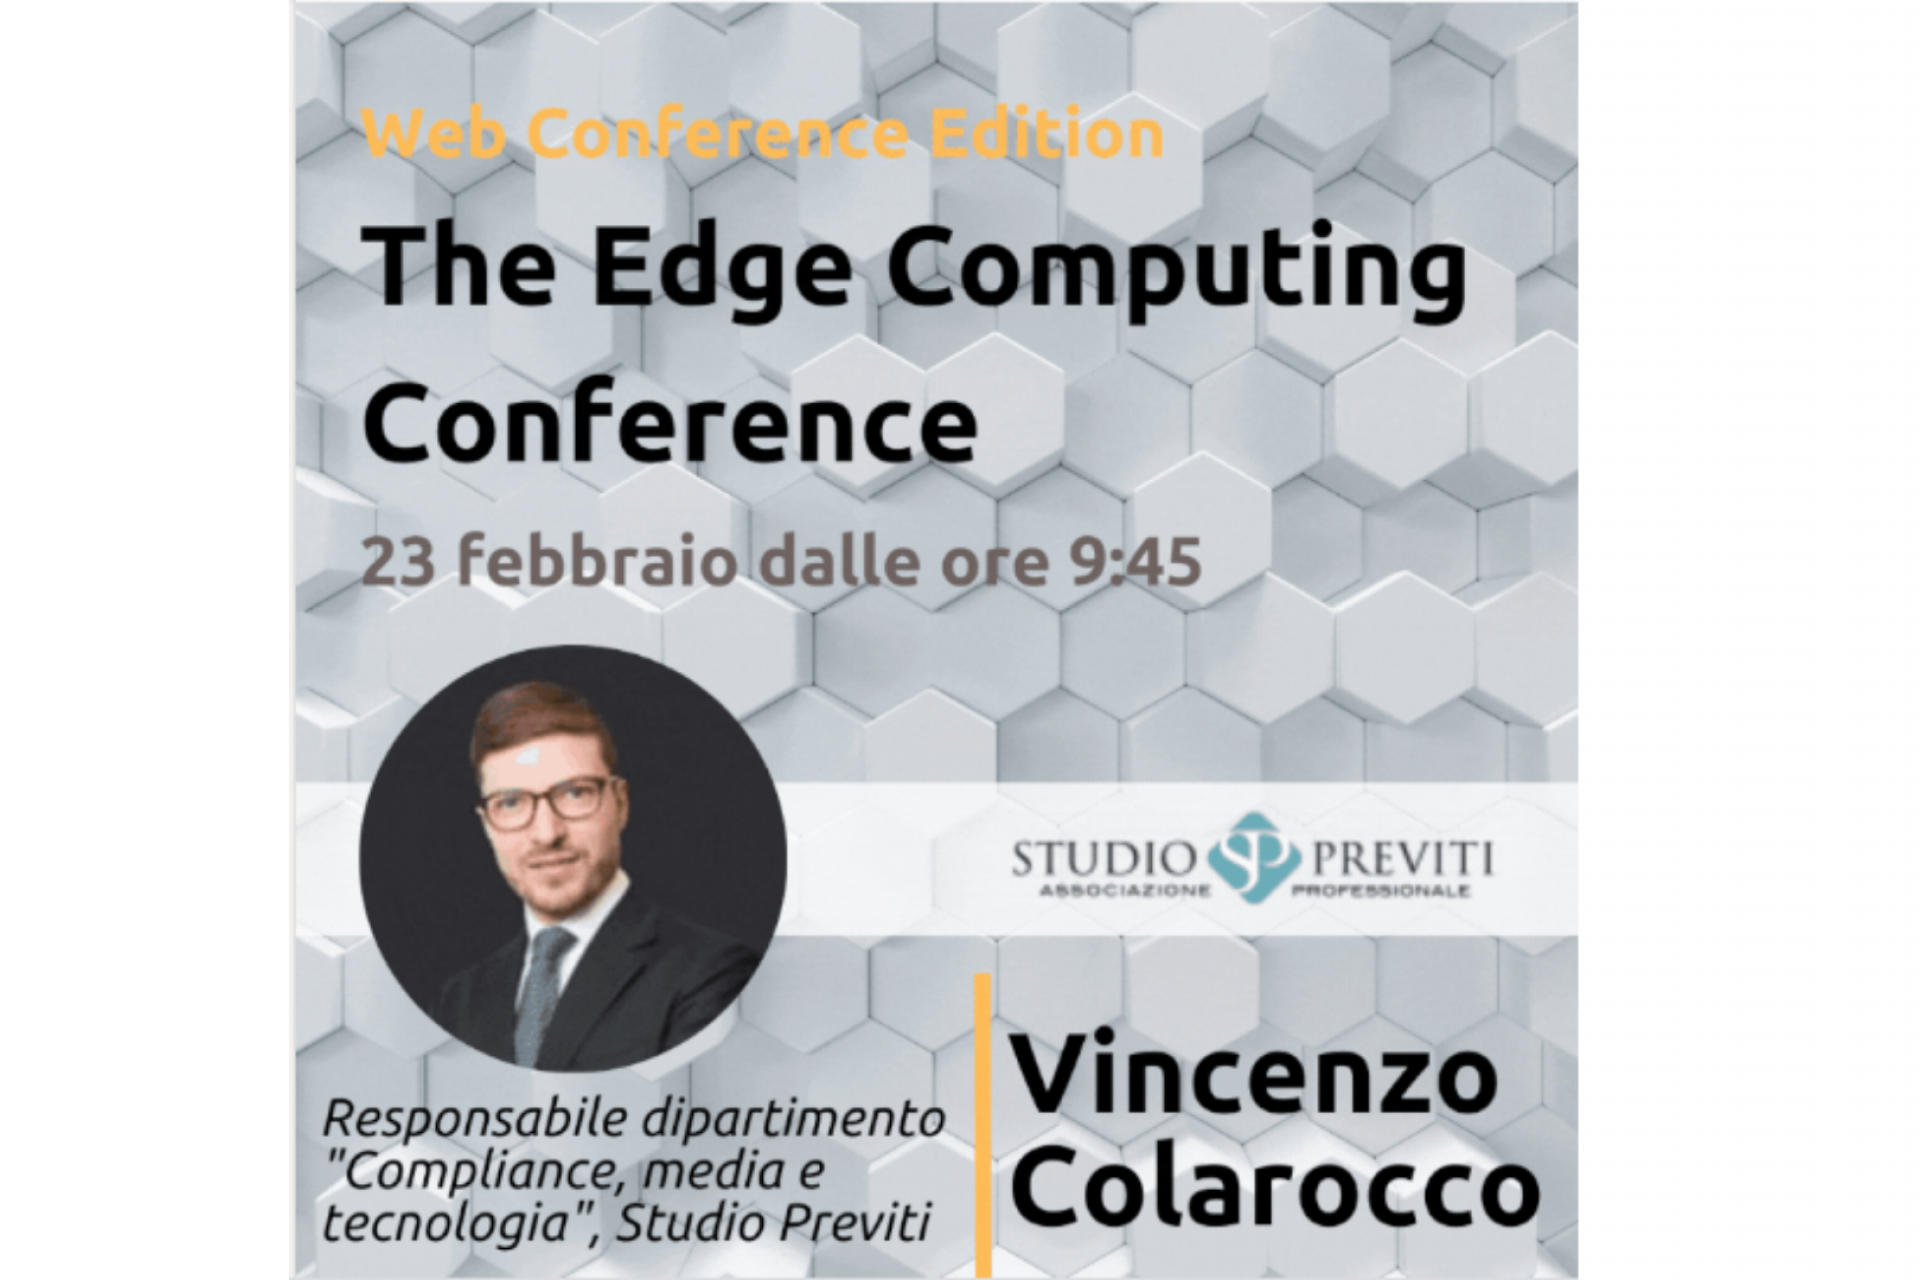 The Edge Computing Conference